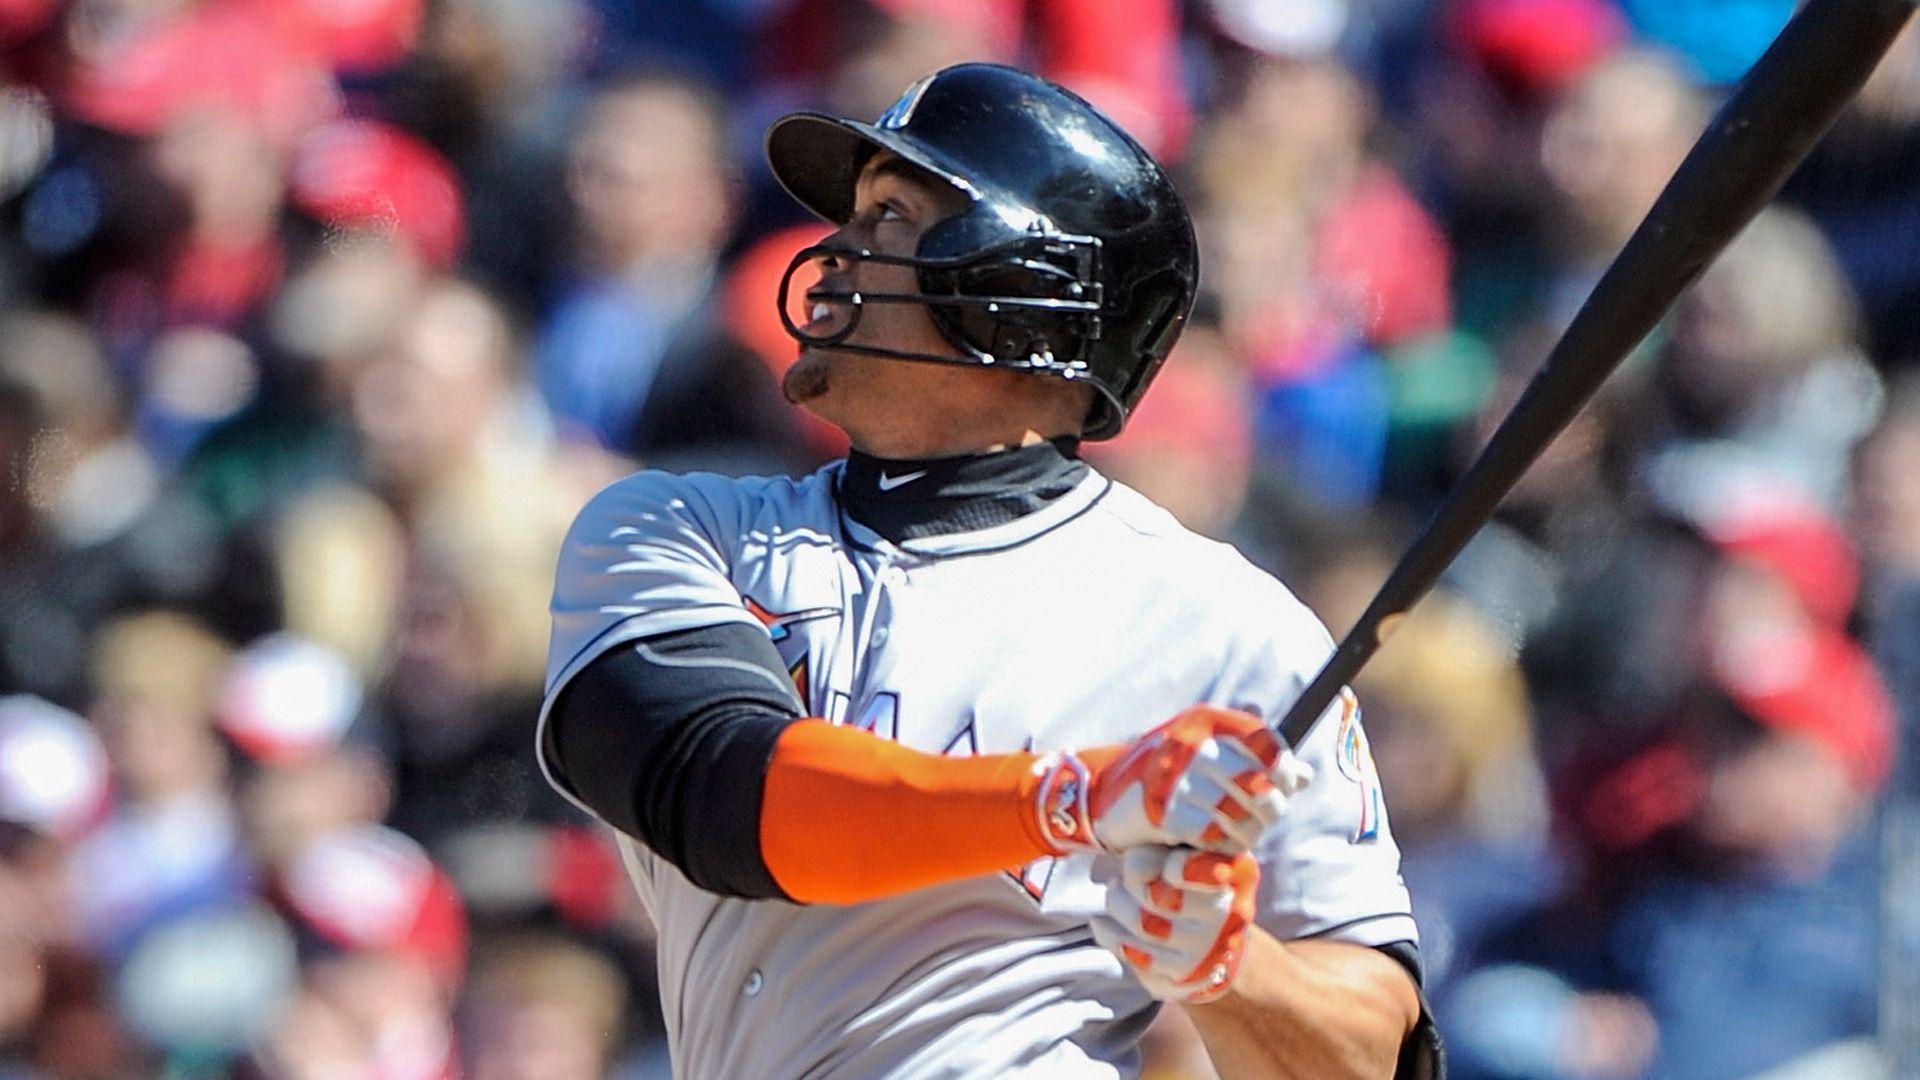 Get a whiff of Giancarlo Stanton's epic strikeout woes. MLB